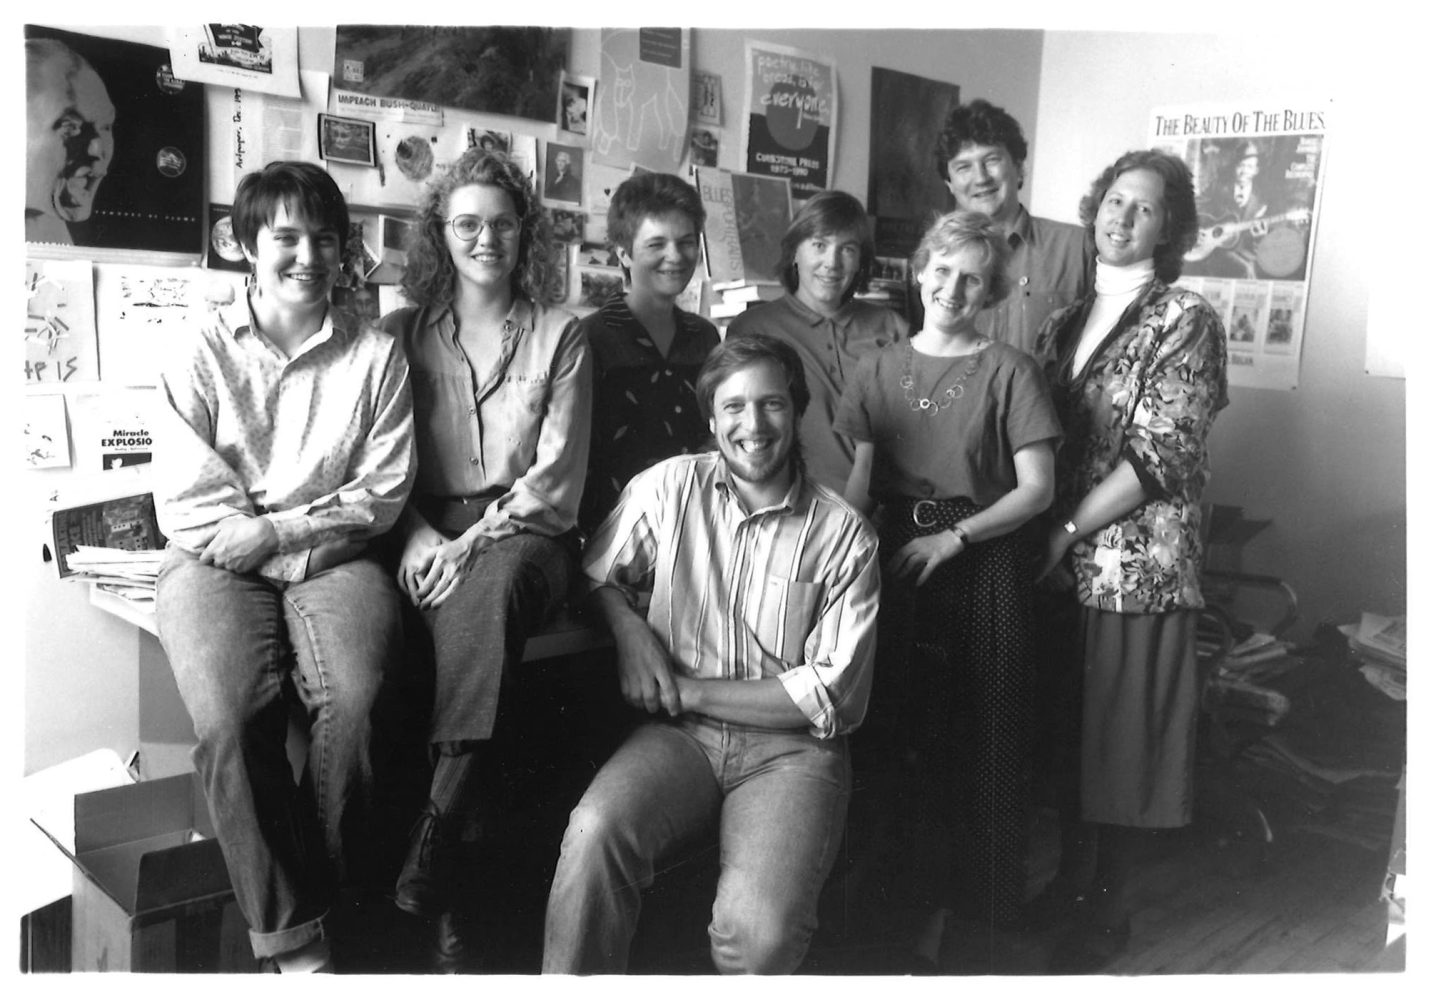 Graywolf Press staff in their St. Paul office. From left to right: M. Lee, E. Gjere, E. Foos, S. Walker, M. Madison, A. Czarniecki, C. Faatz, B. Milligan. (Photo/Wing Young Huie)